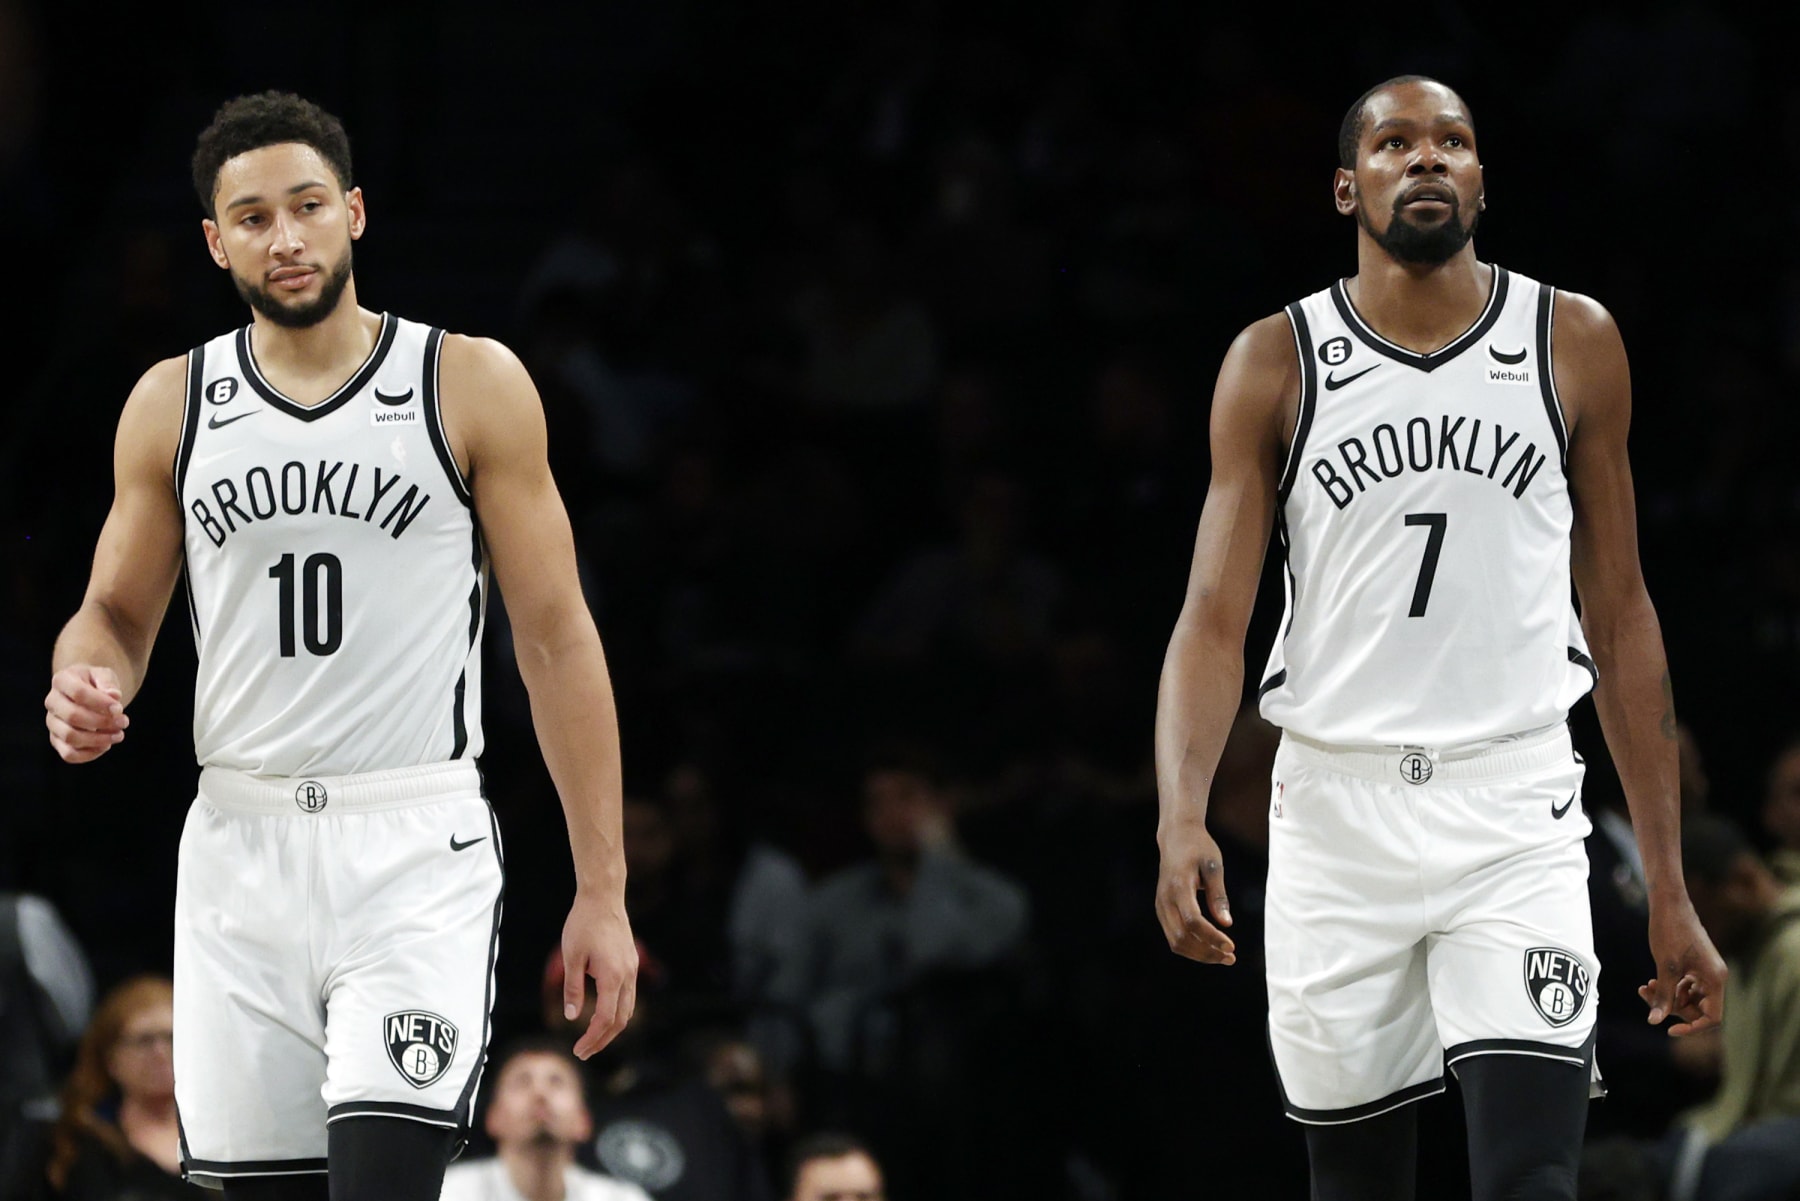 RECAP: Sean Marks and Nets 'ecstatic' over their FIVE picks in